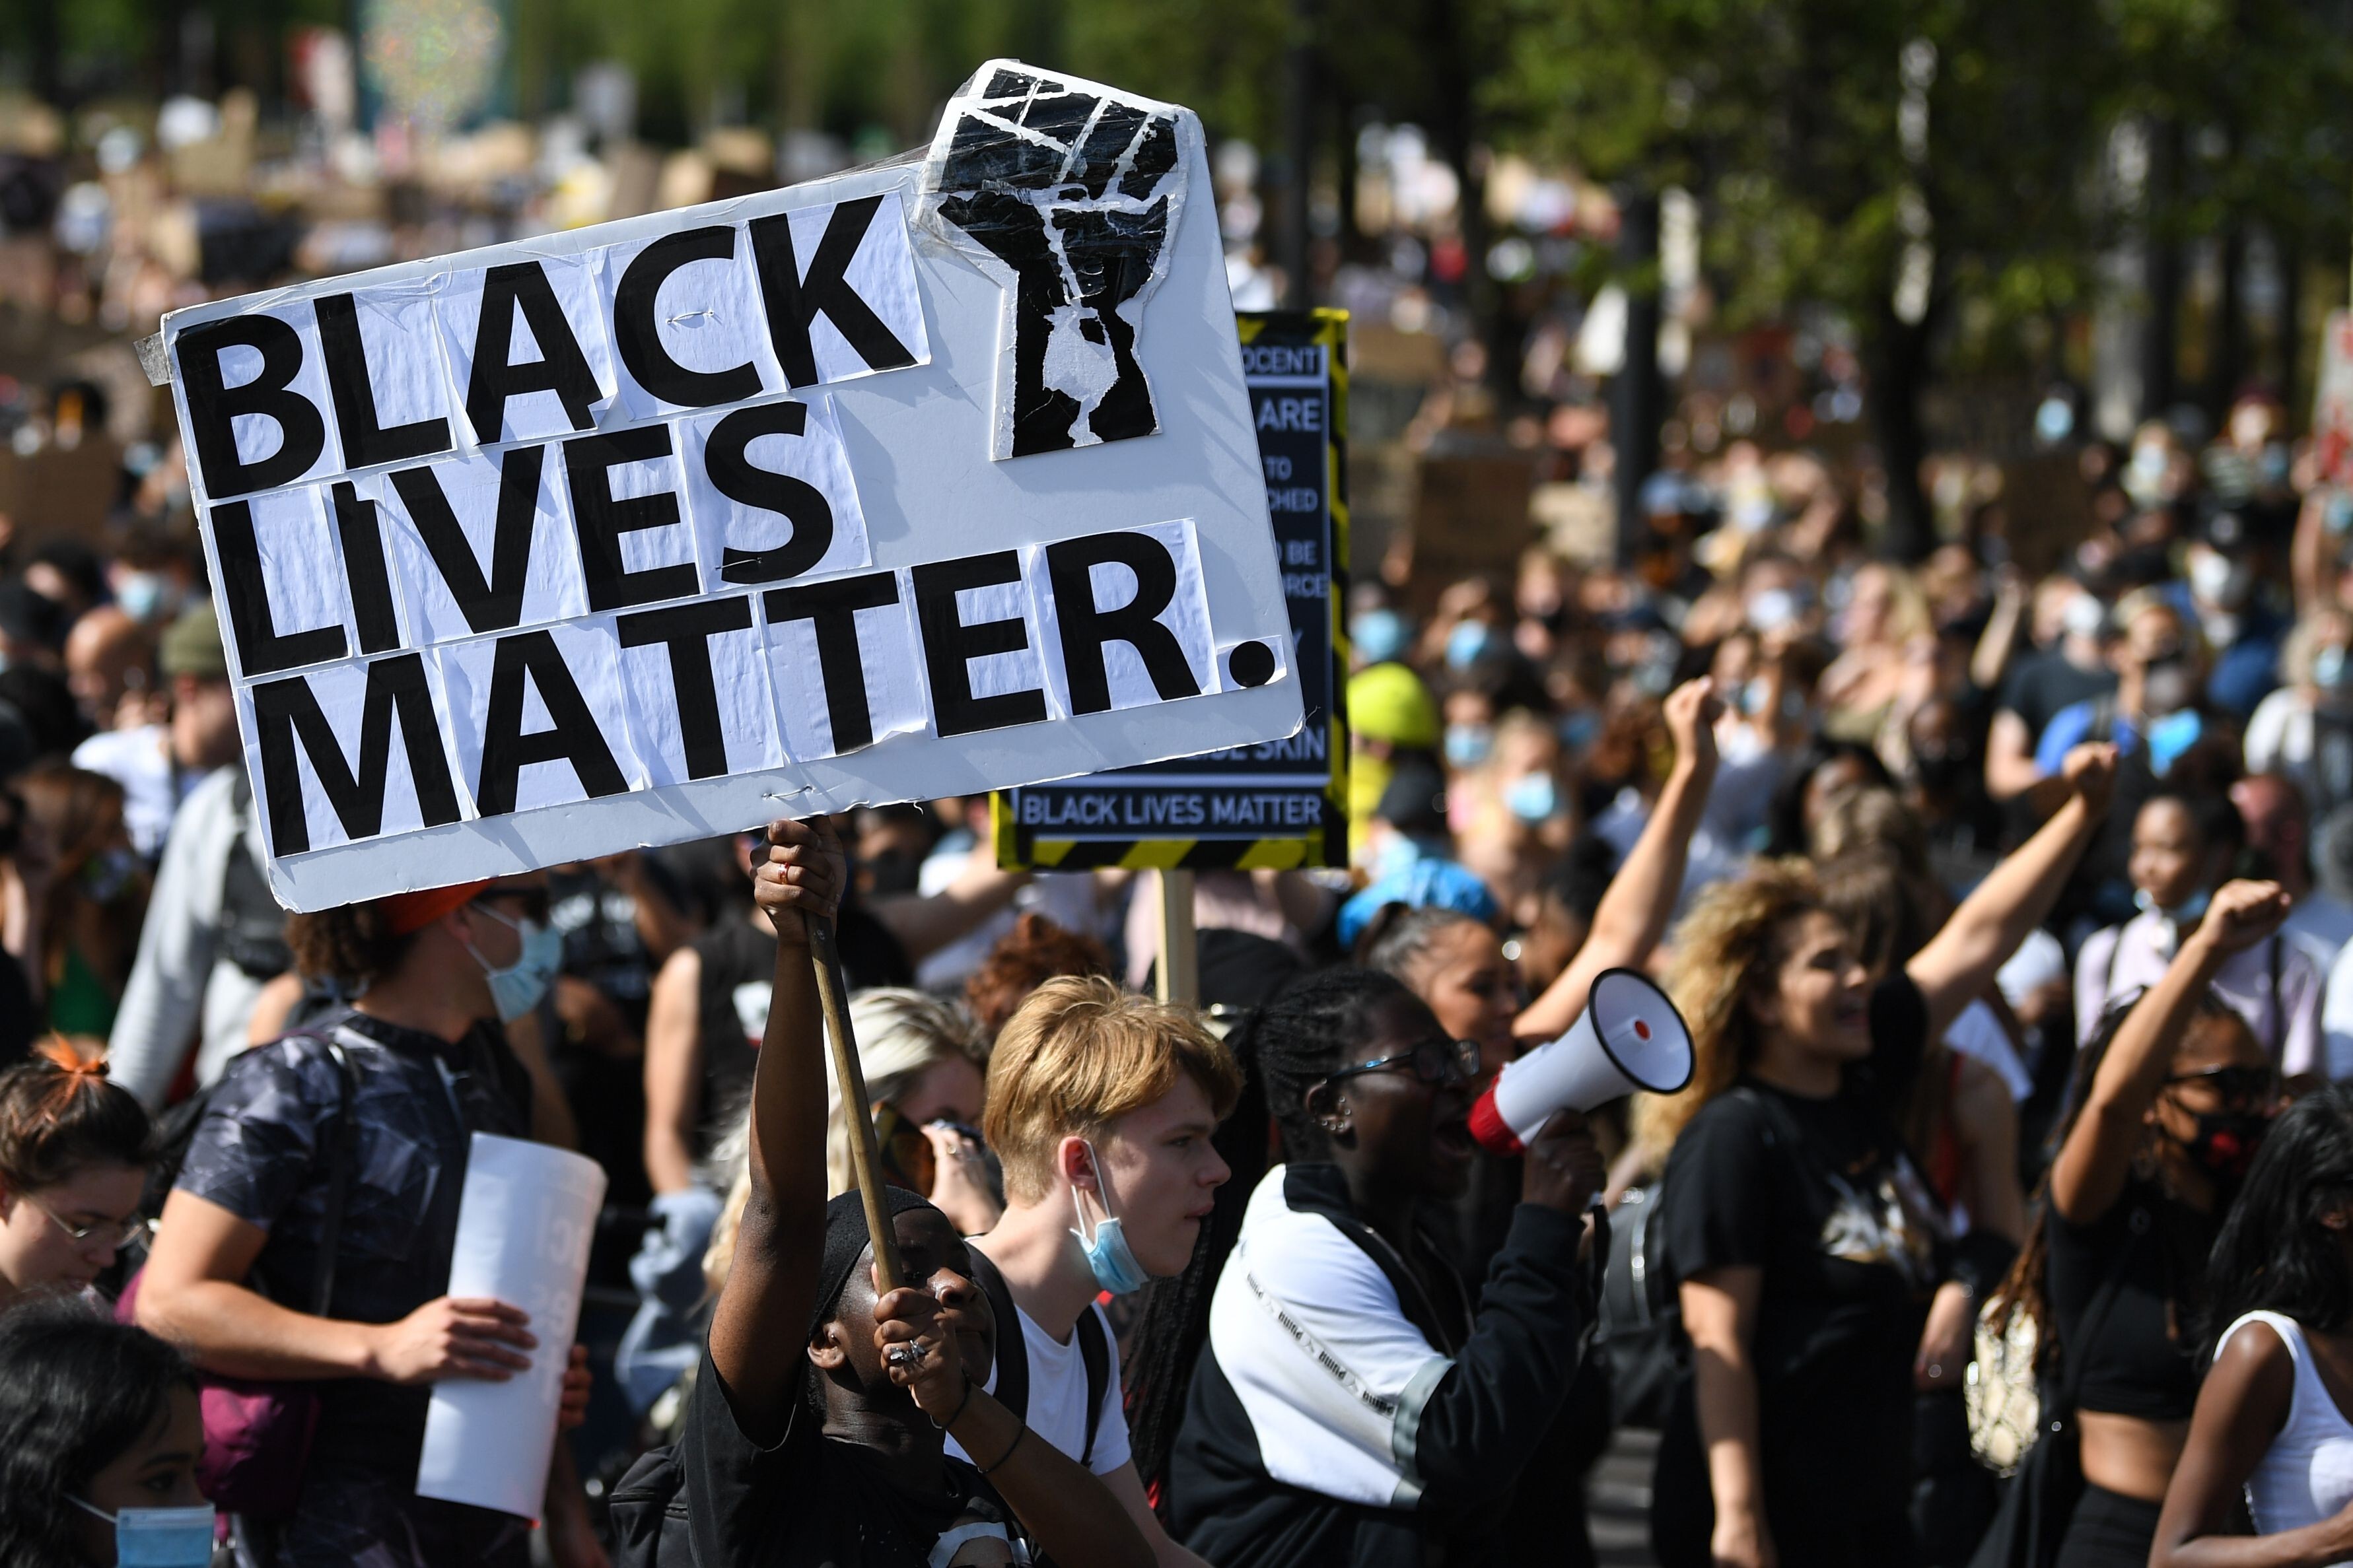 Activists attend a Black Lives Matter rally in central London. File photo: AFP